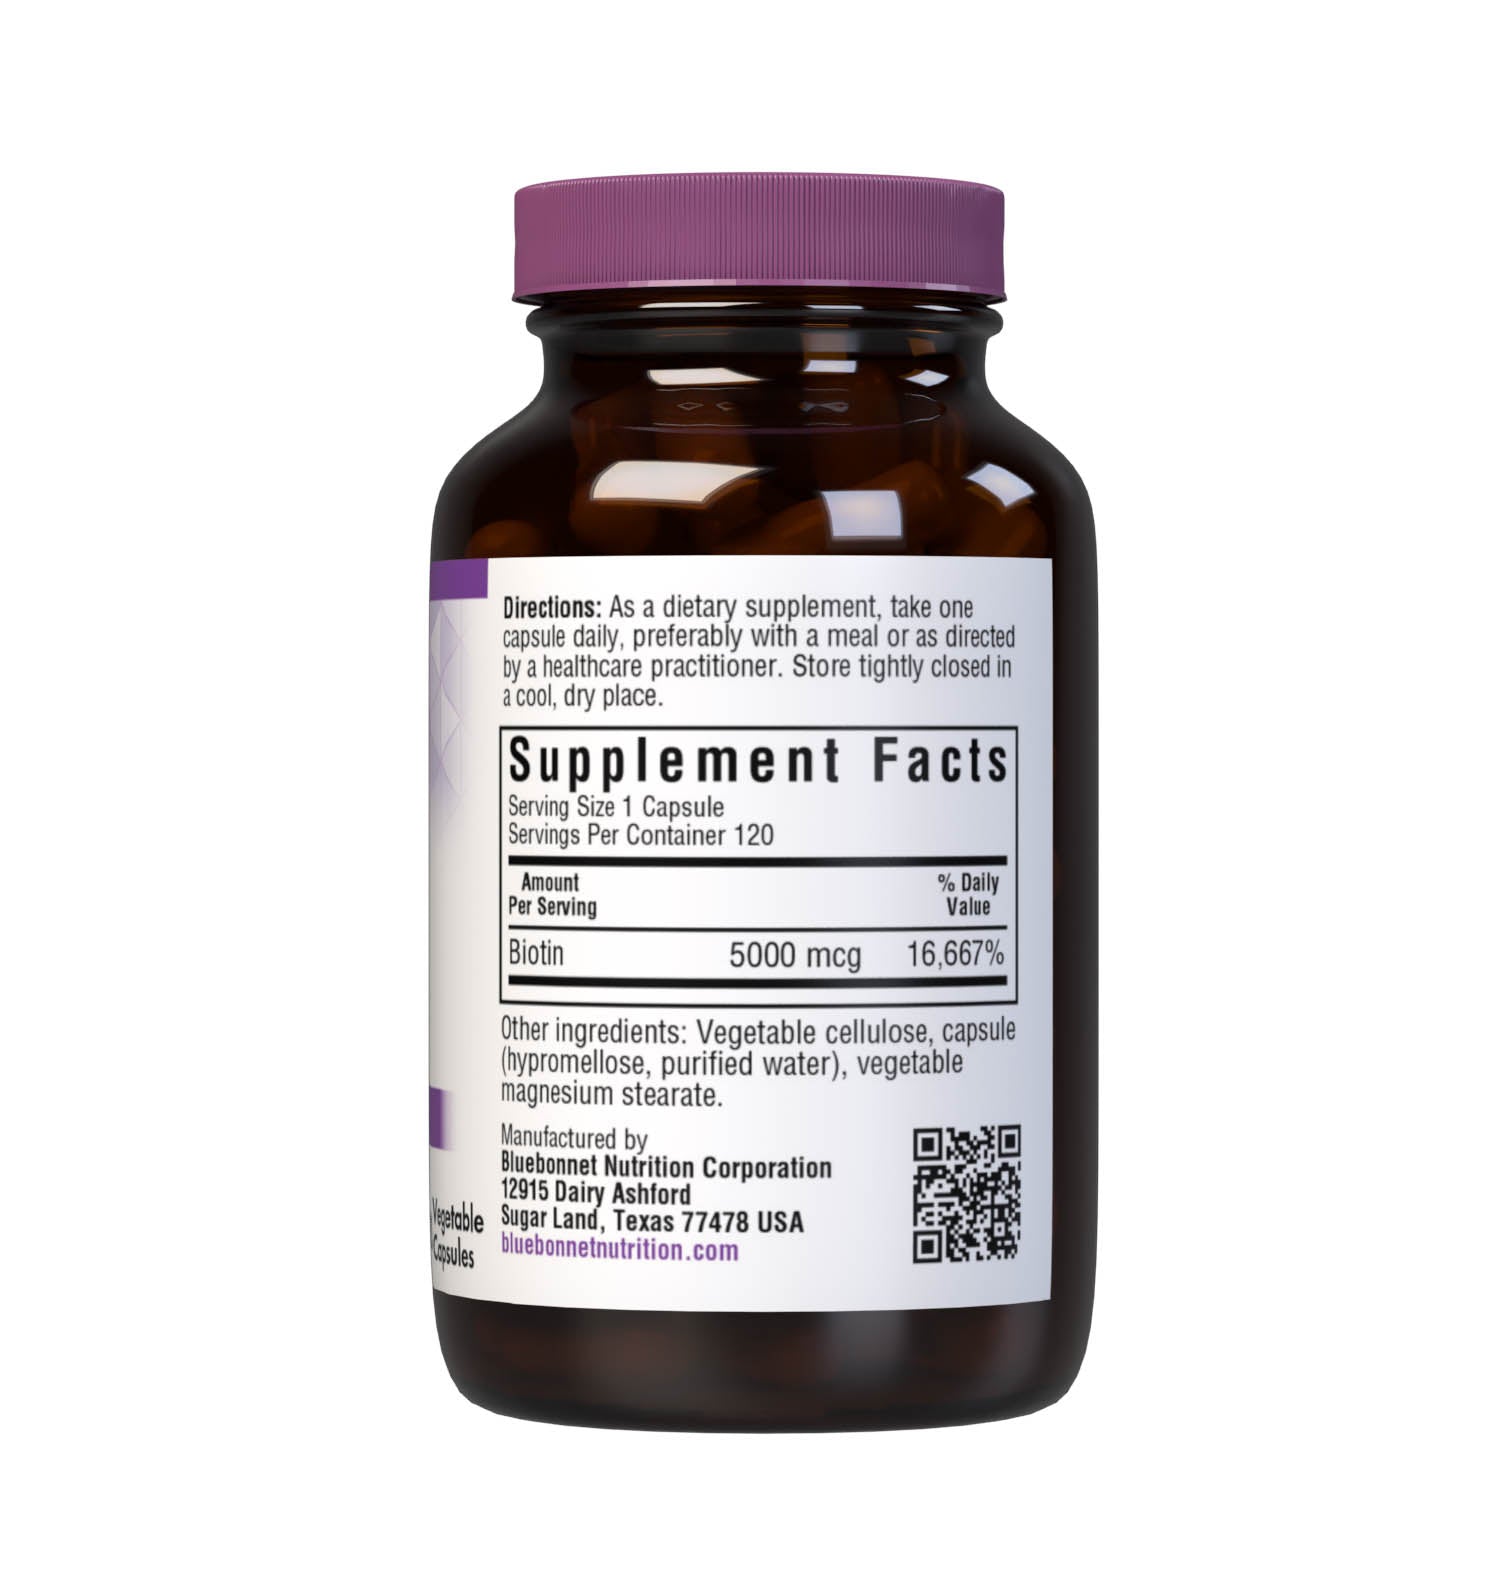 Bluebonnet’s Biotin 5000 mcg Capsules are formulated with yeast-free biotin in its crystalline form to support healthy hair and strong, durable nails. Supplement facts panel. #size_120 count